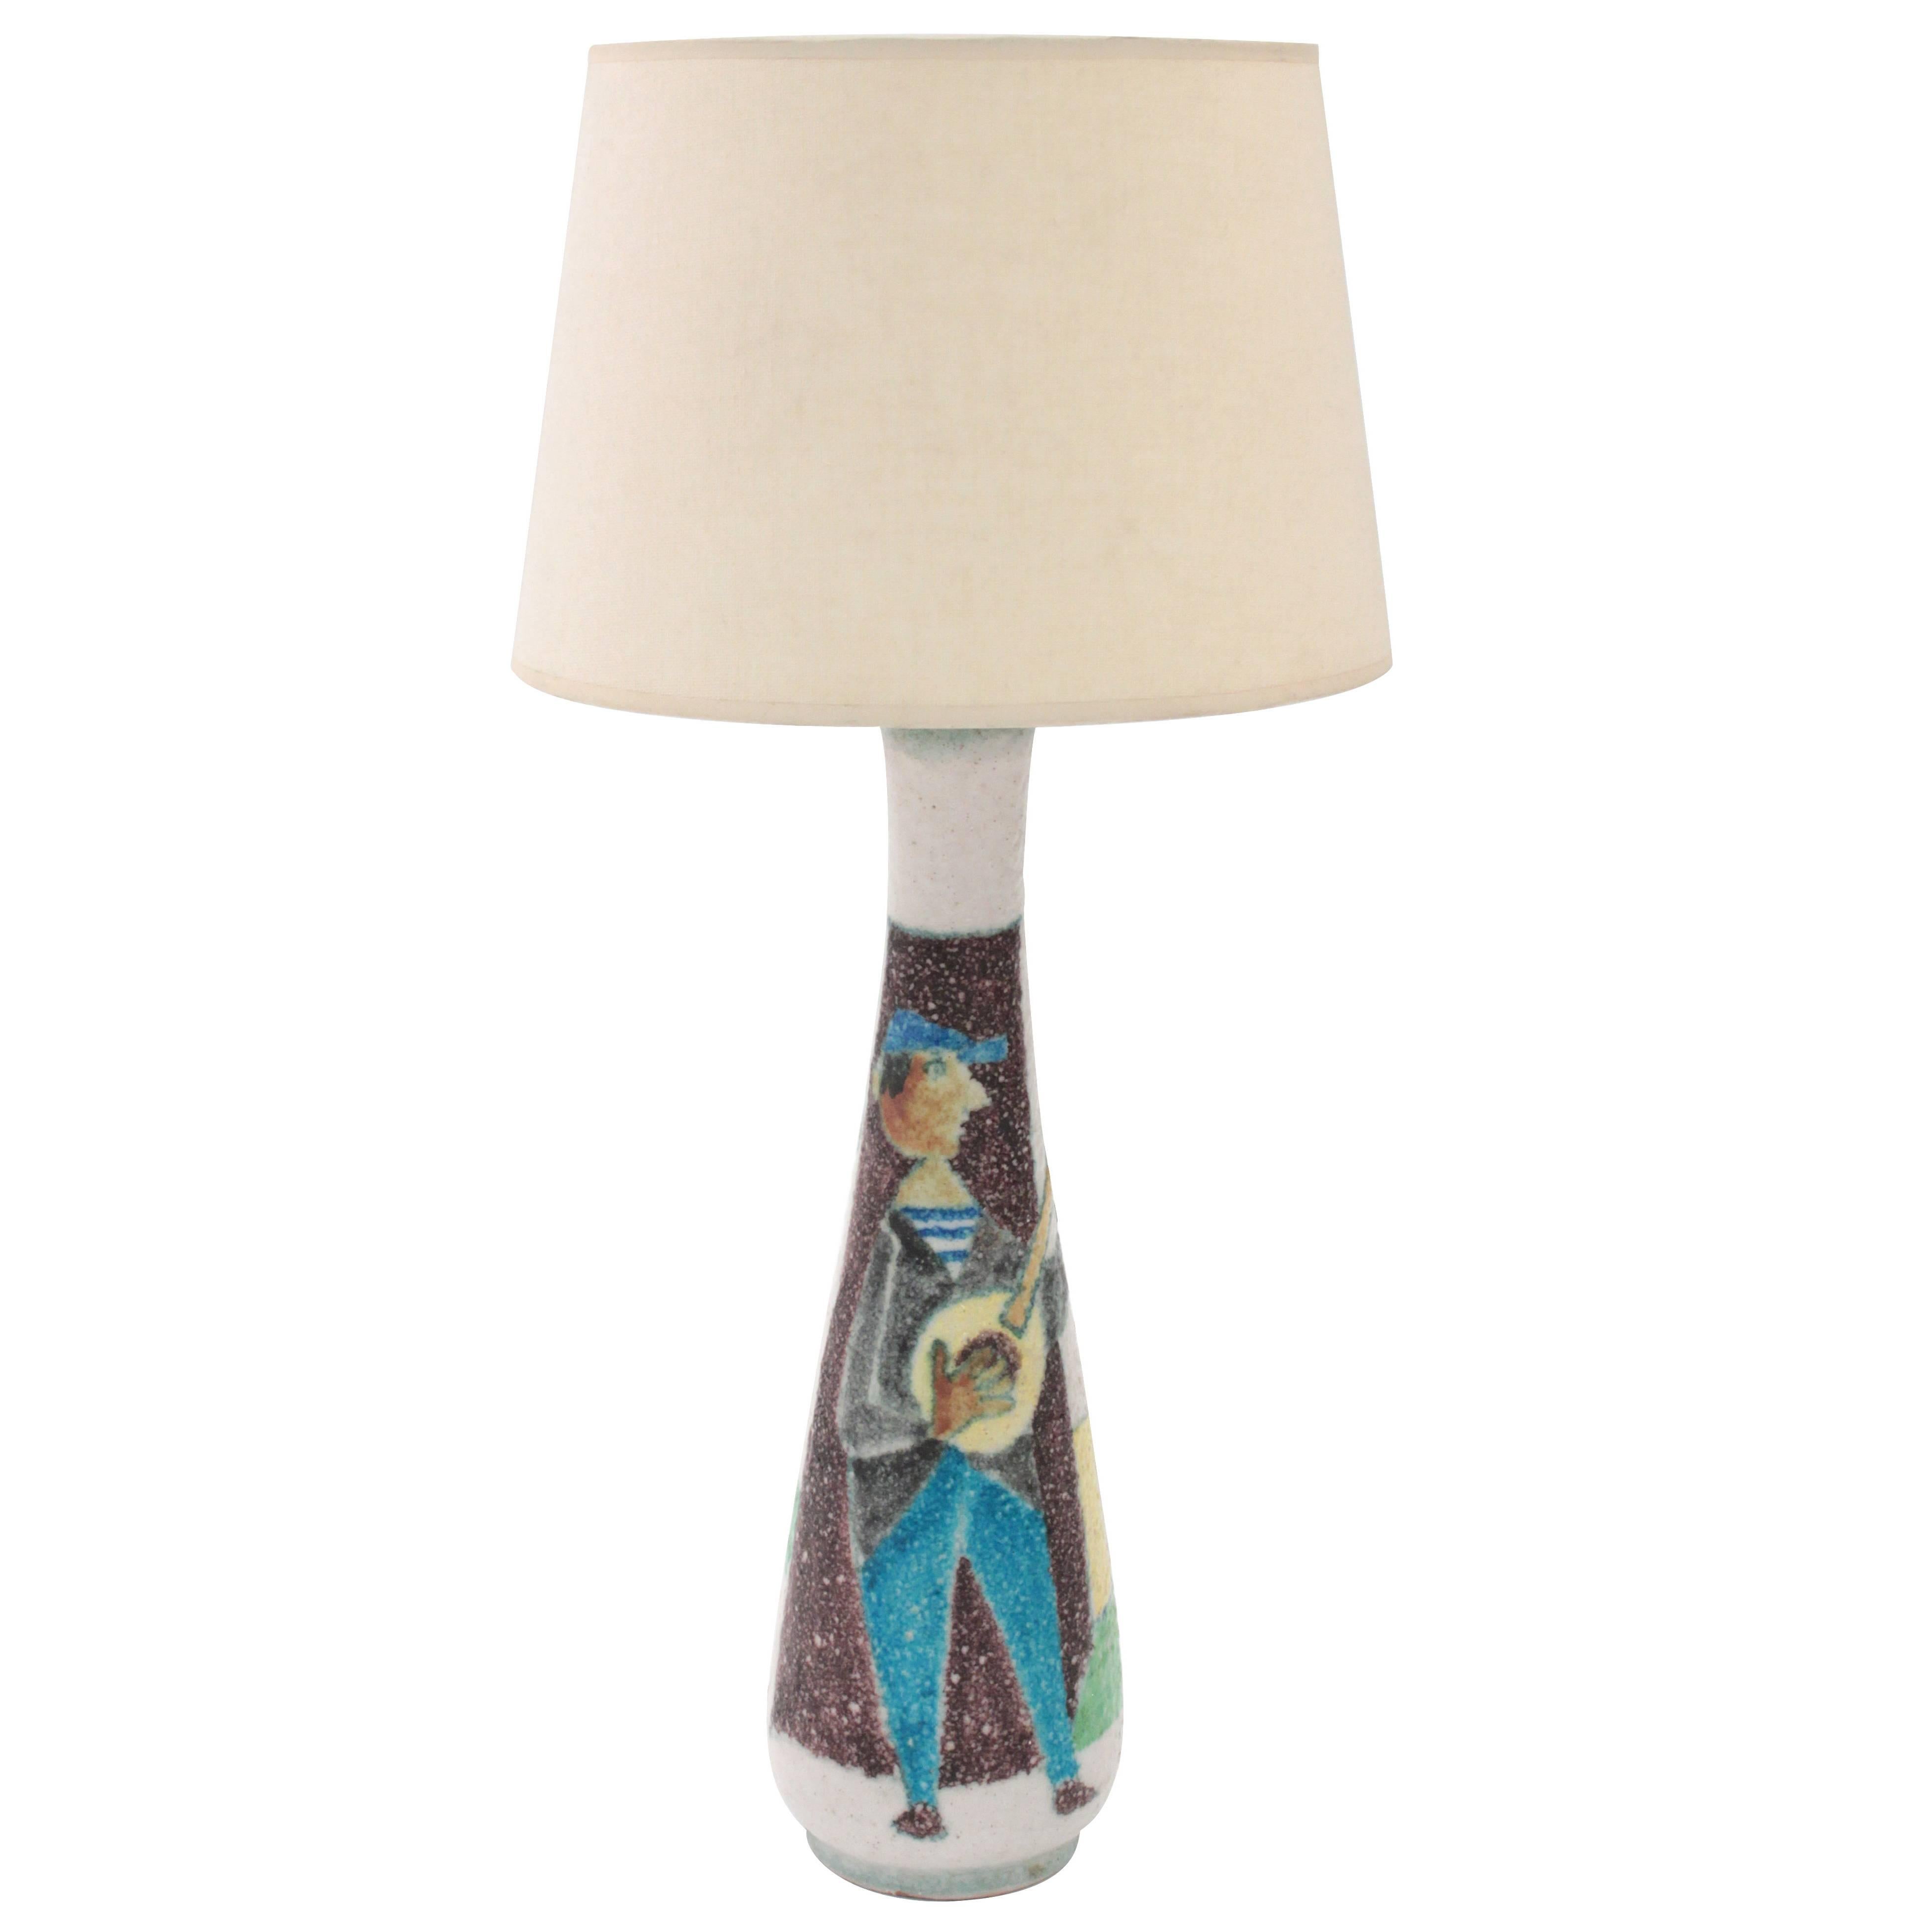 Studio Made Ceramic Table Lamp with Figural Decoration by Guido Gambone